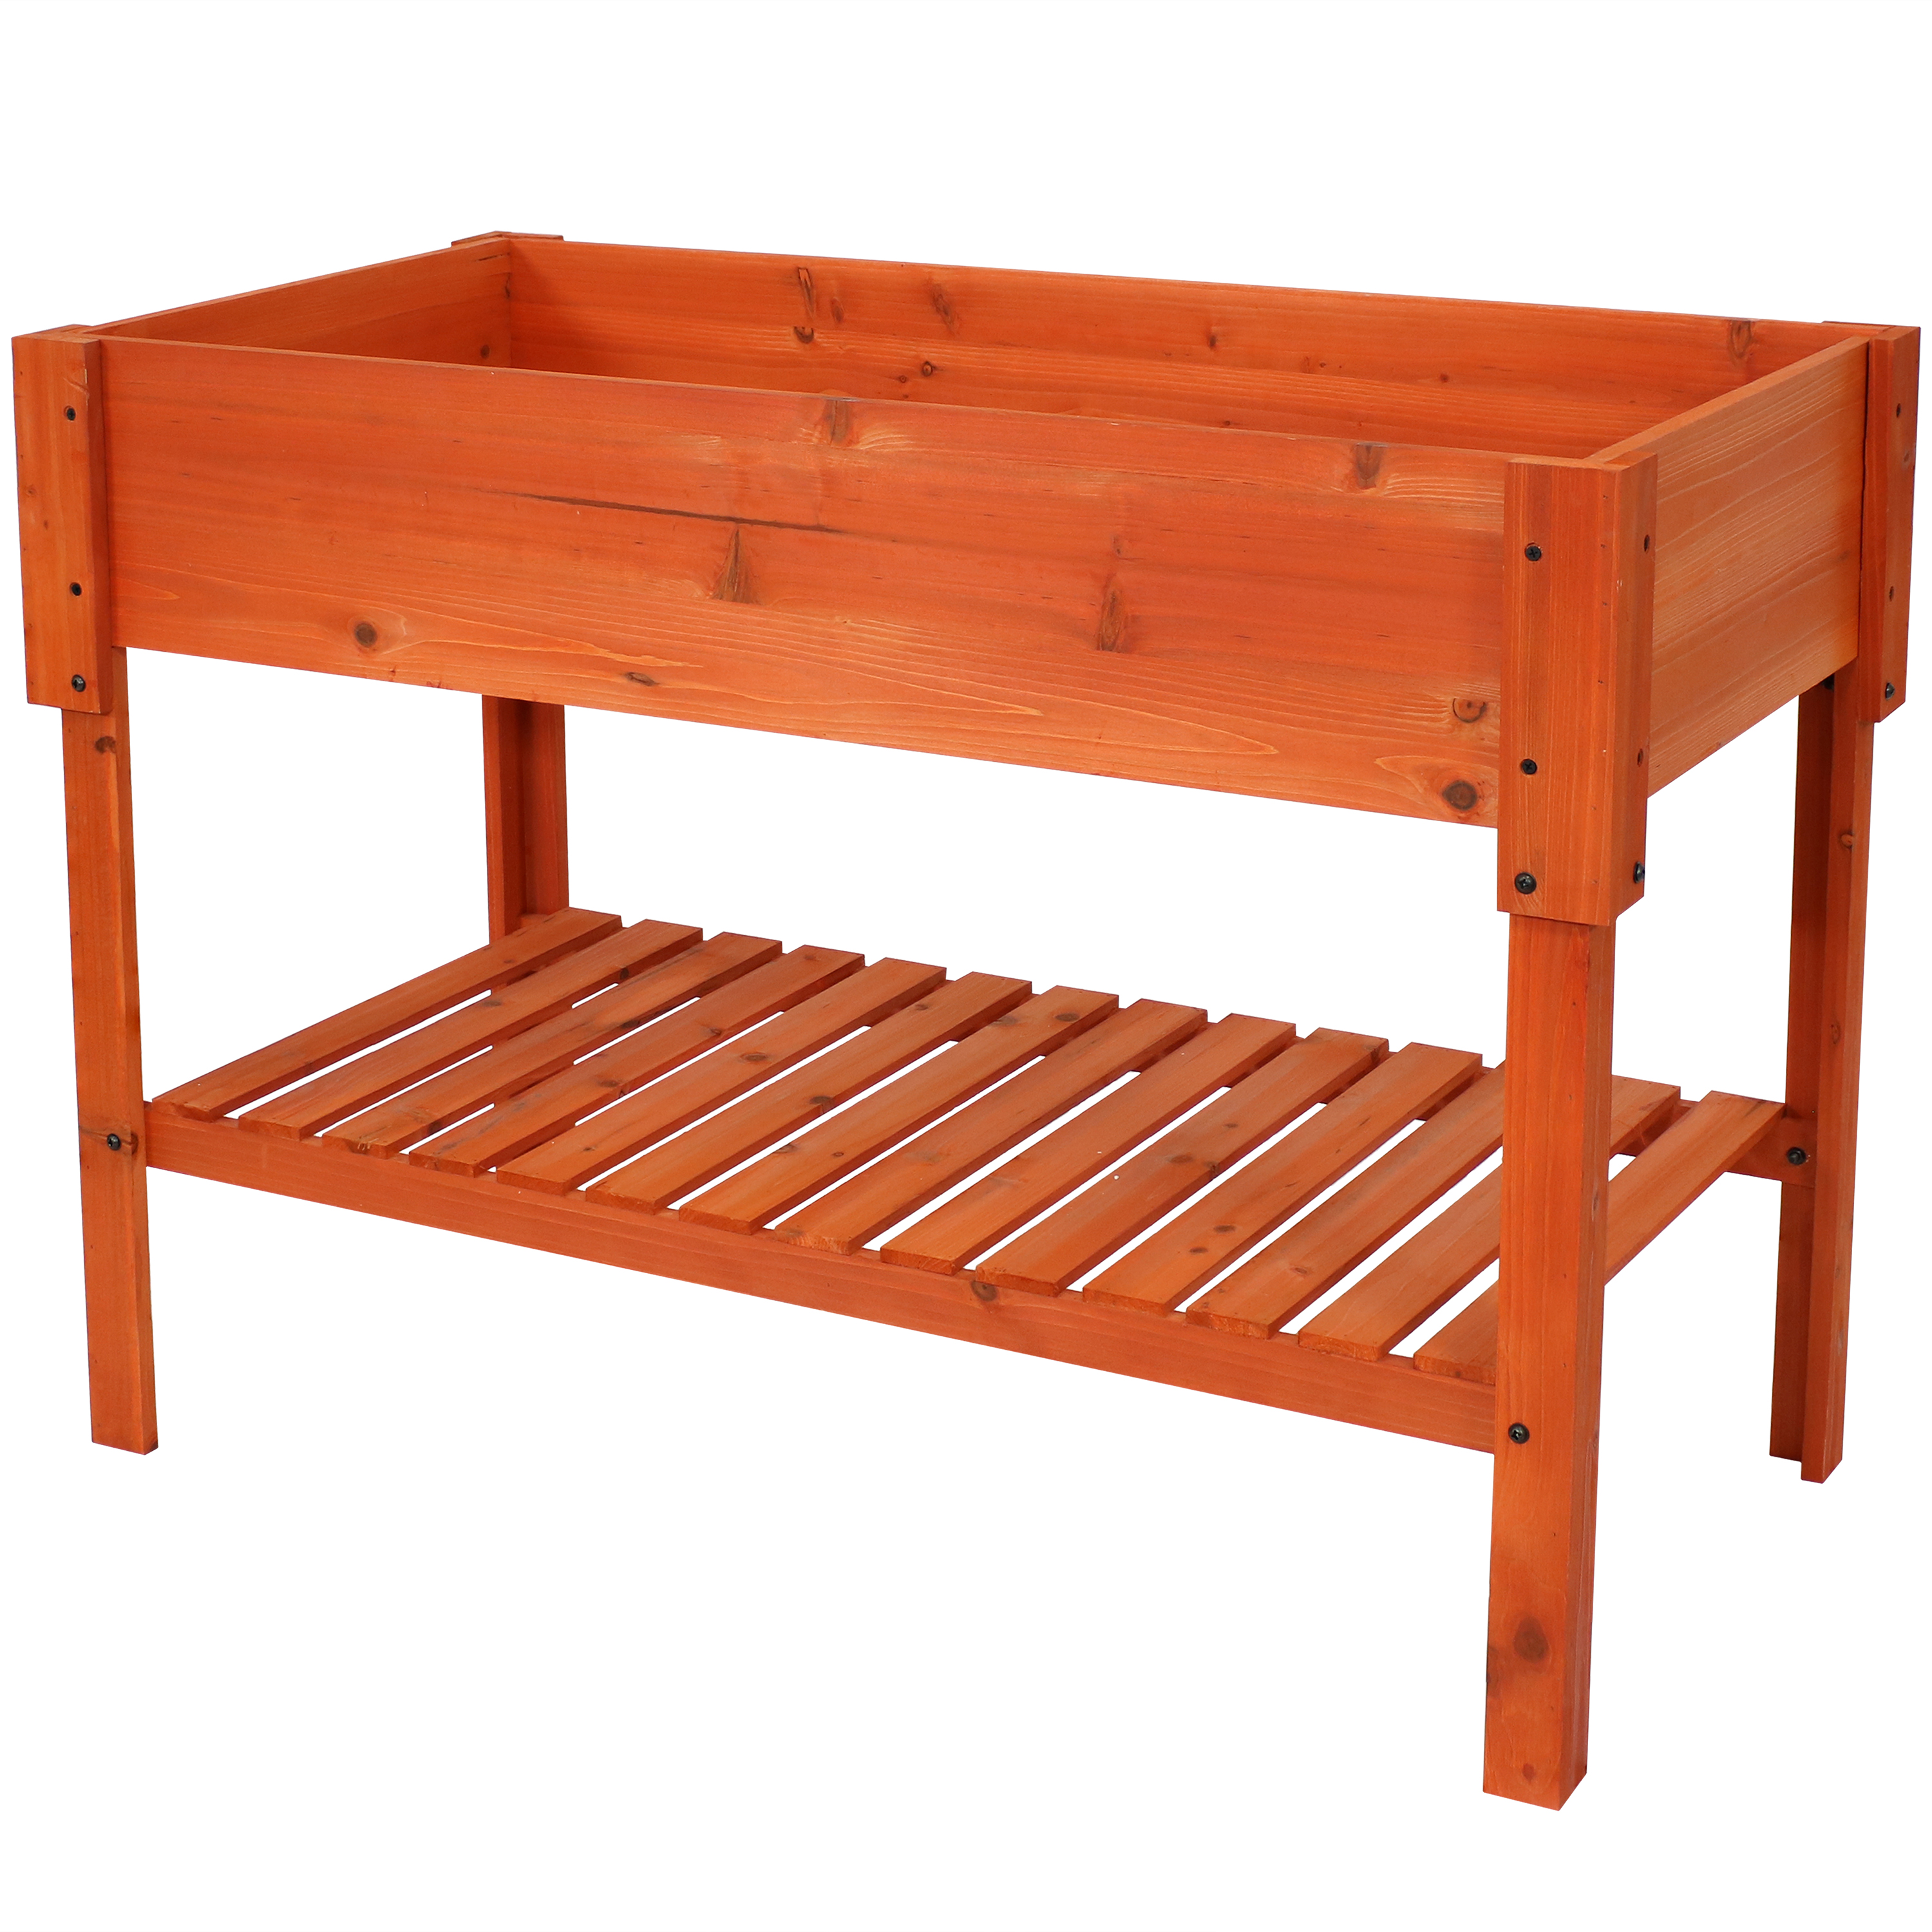 42 in Stained Wood Raised Garden Bed Planter Box with Shelf